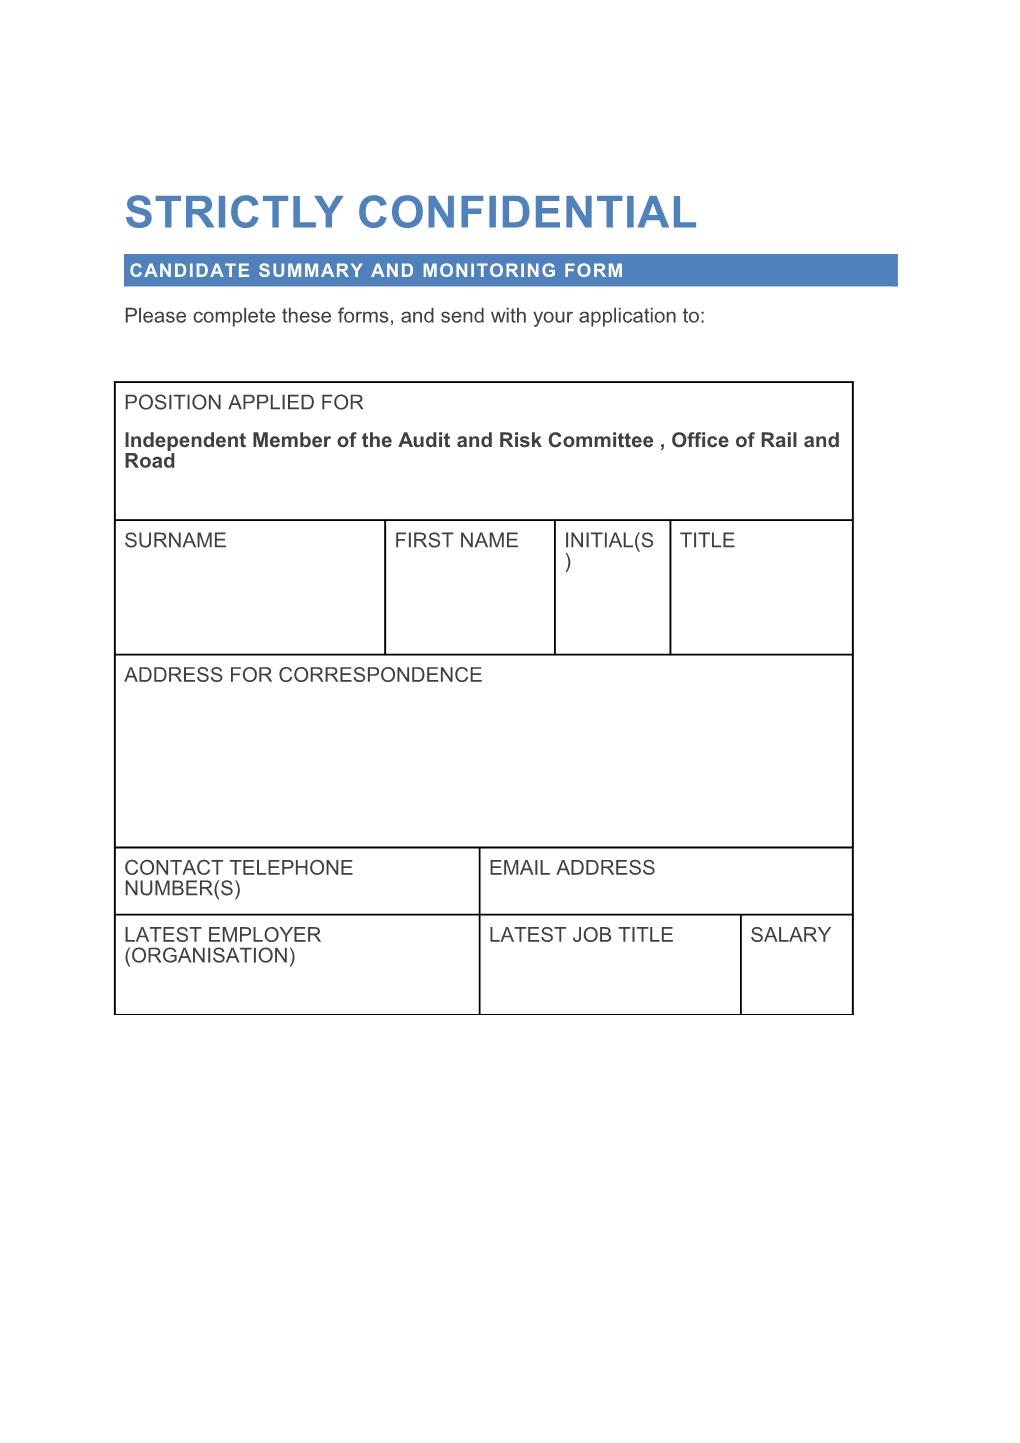 Candidate Summary and Monitoring Form